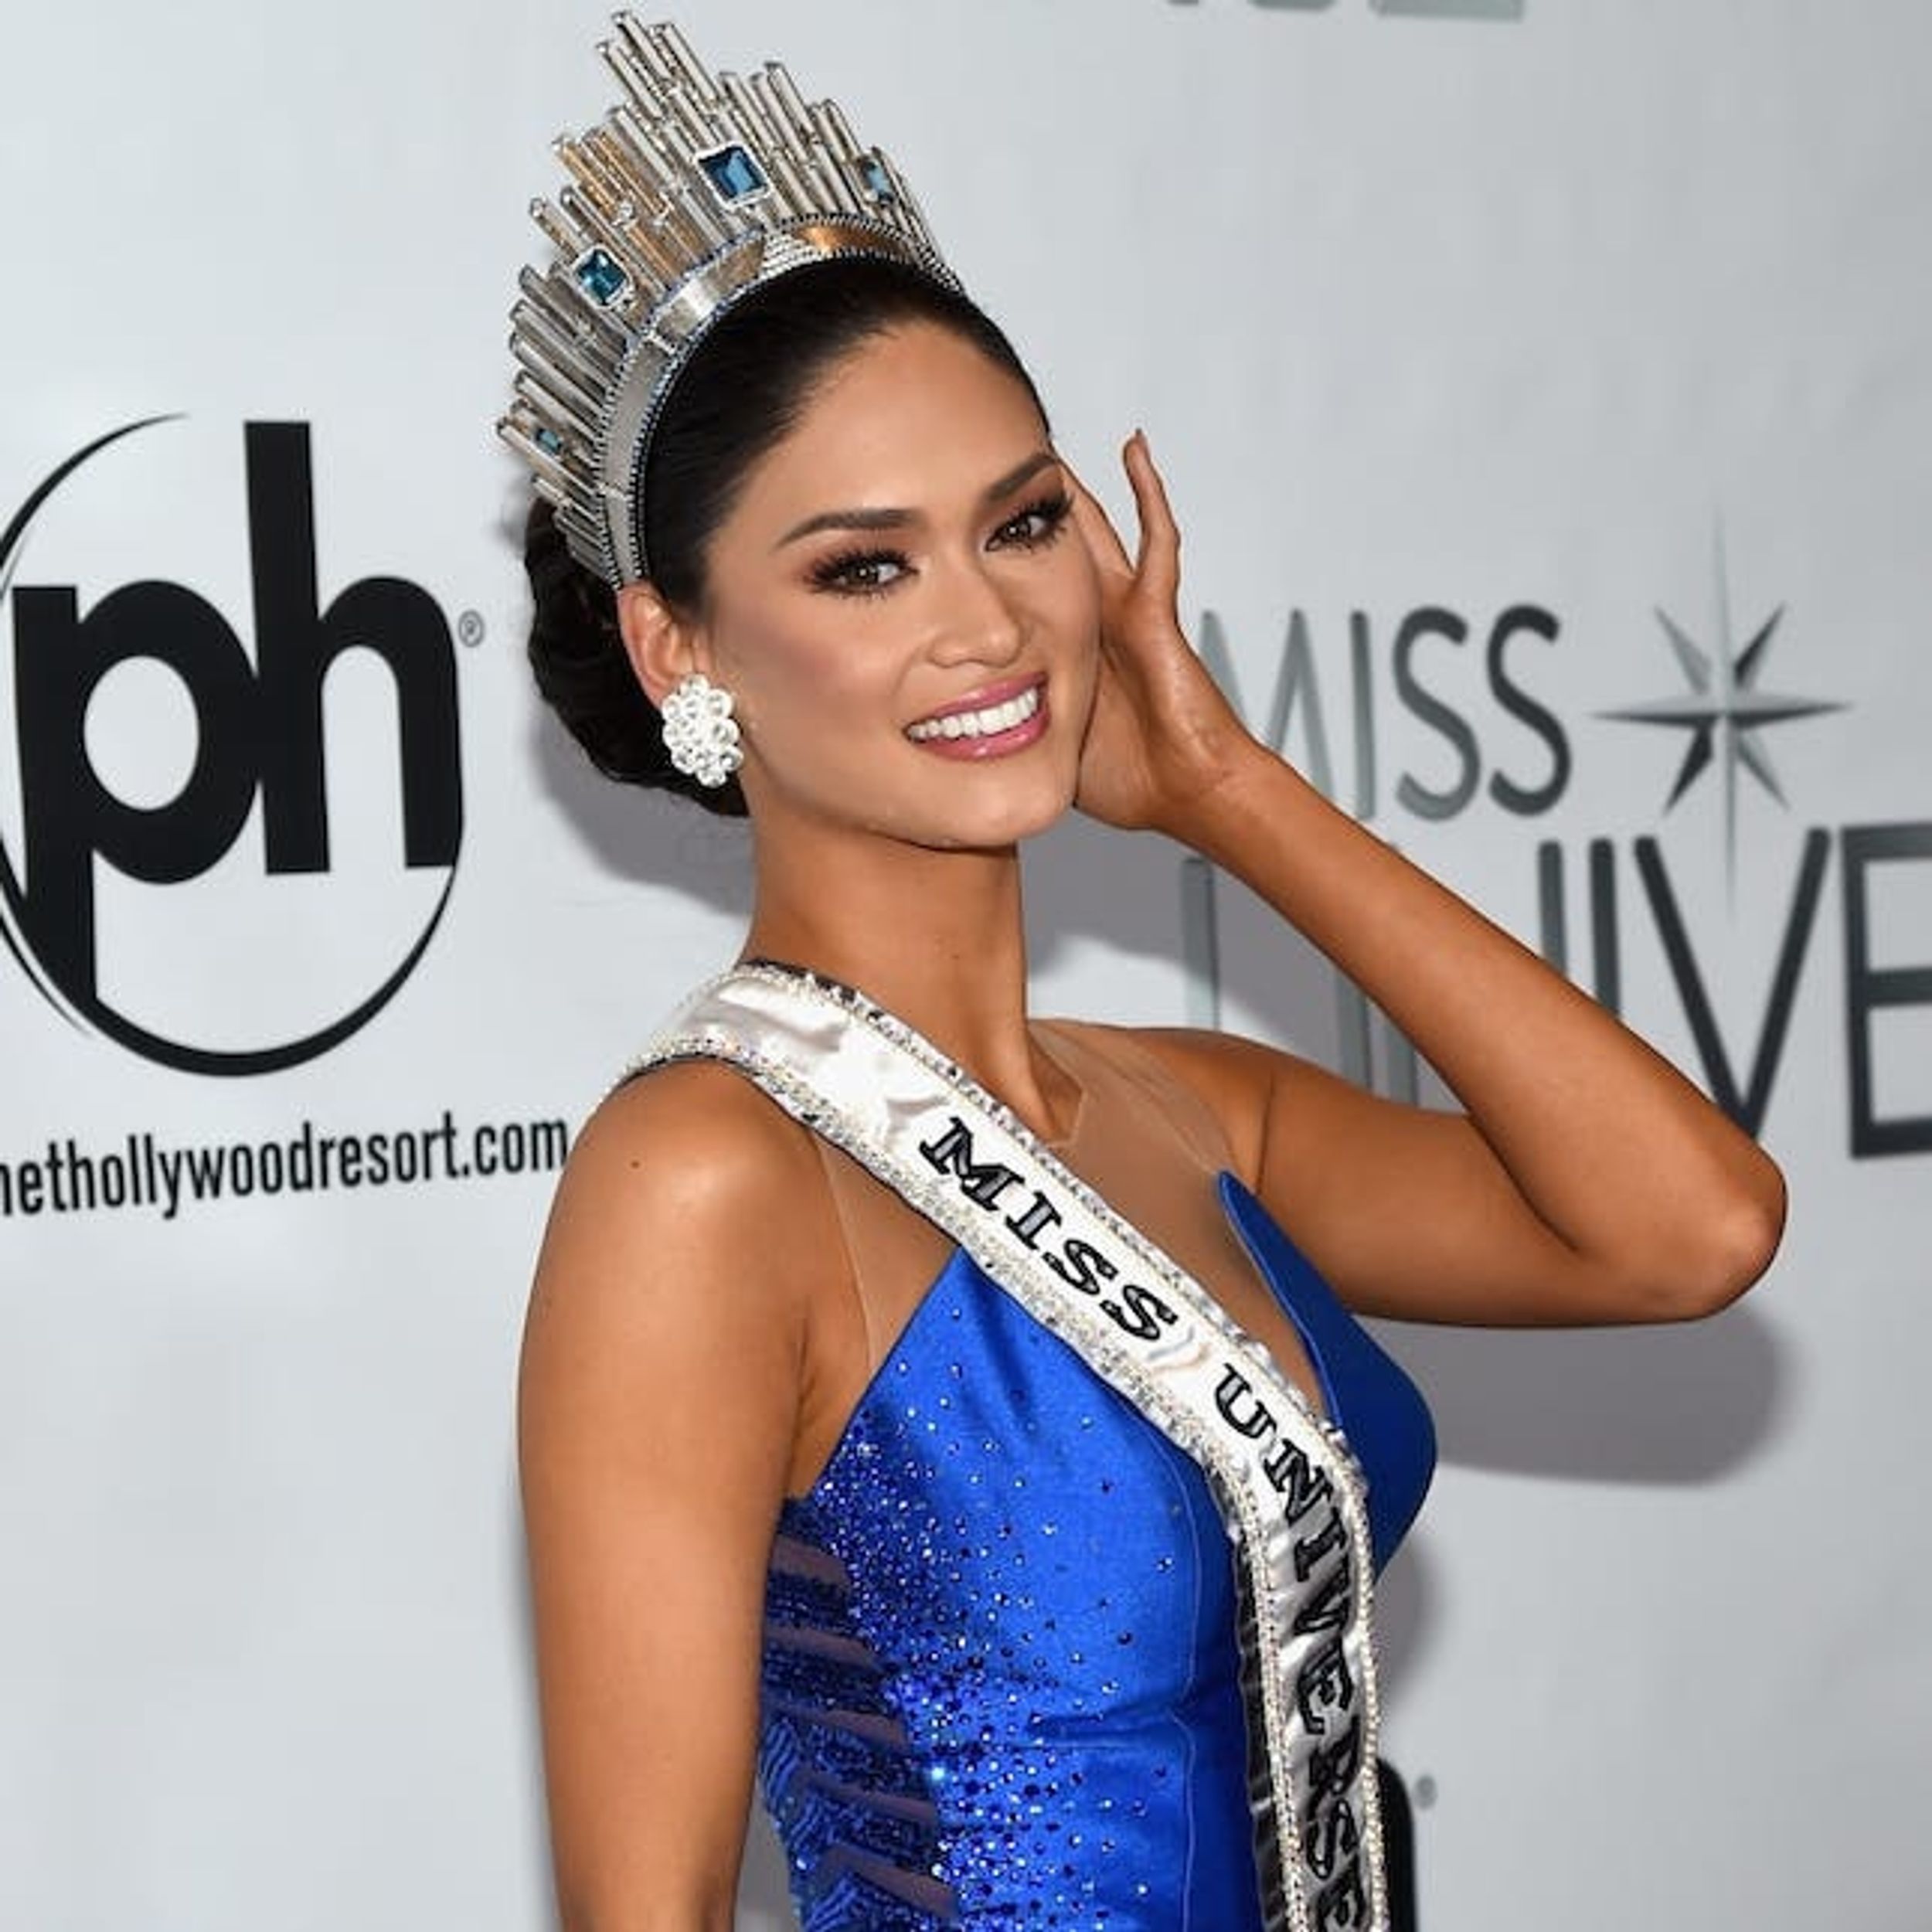 5 Miss Universe Looks That Wouldn’t Be Crazy to Wear on NYE